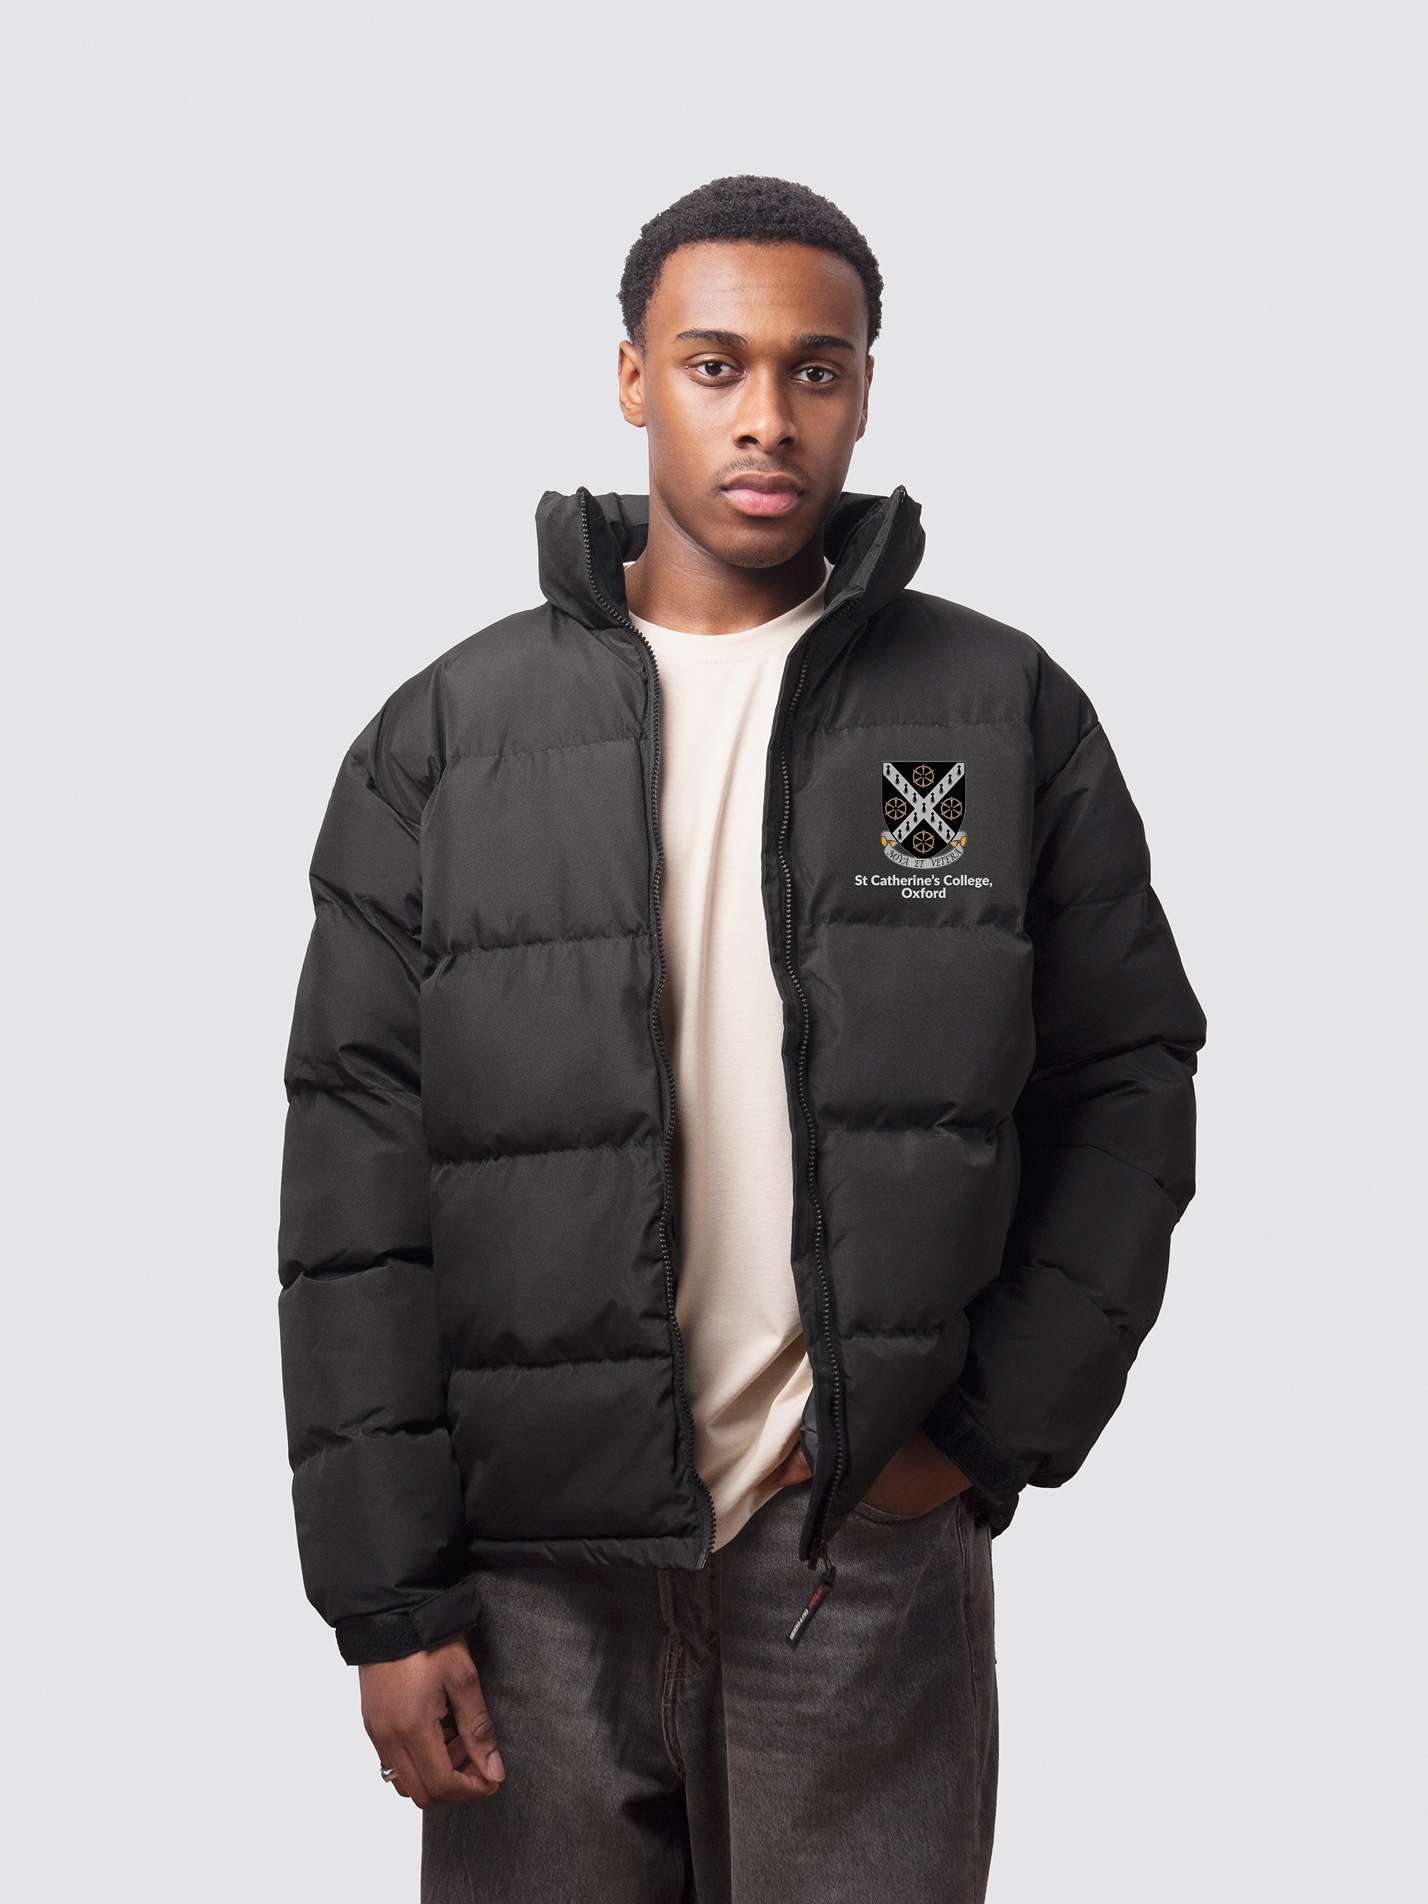 A student wearing a black college puffer jacket, with an embroidered left-chest logo